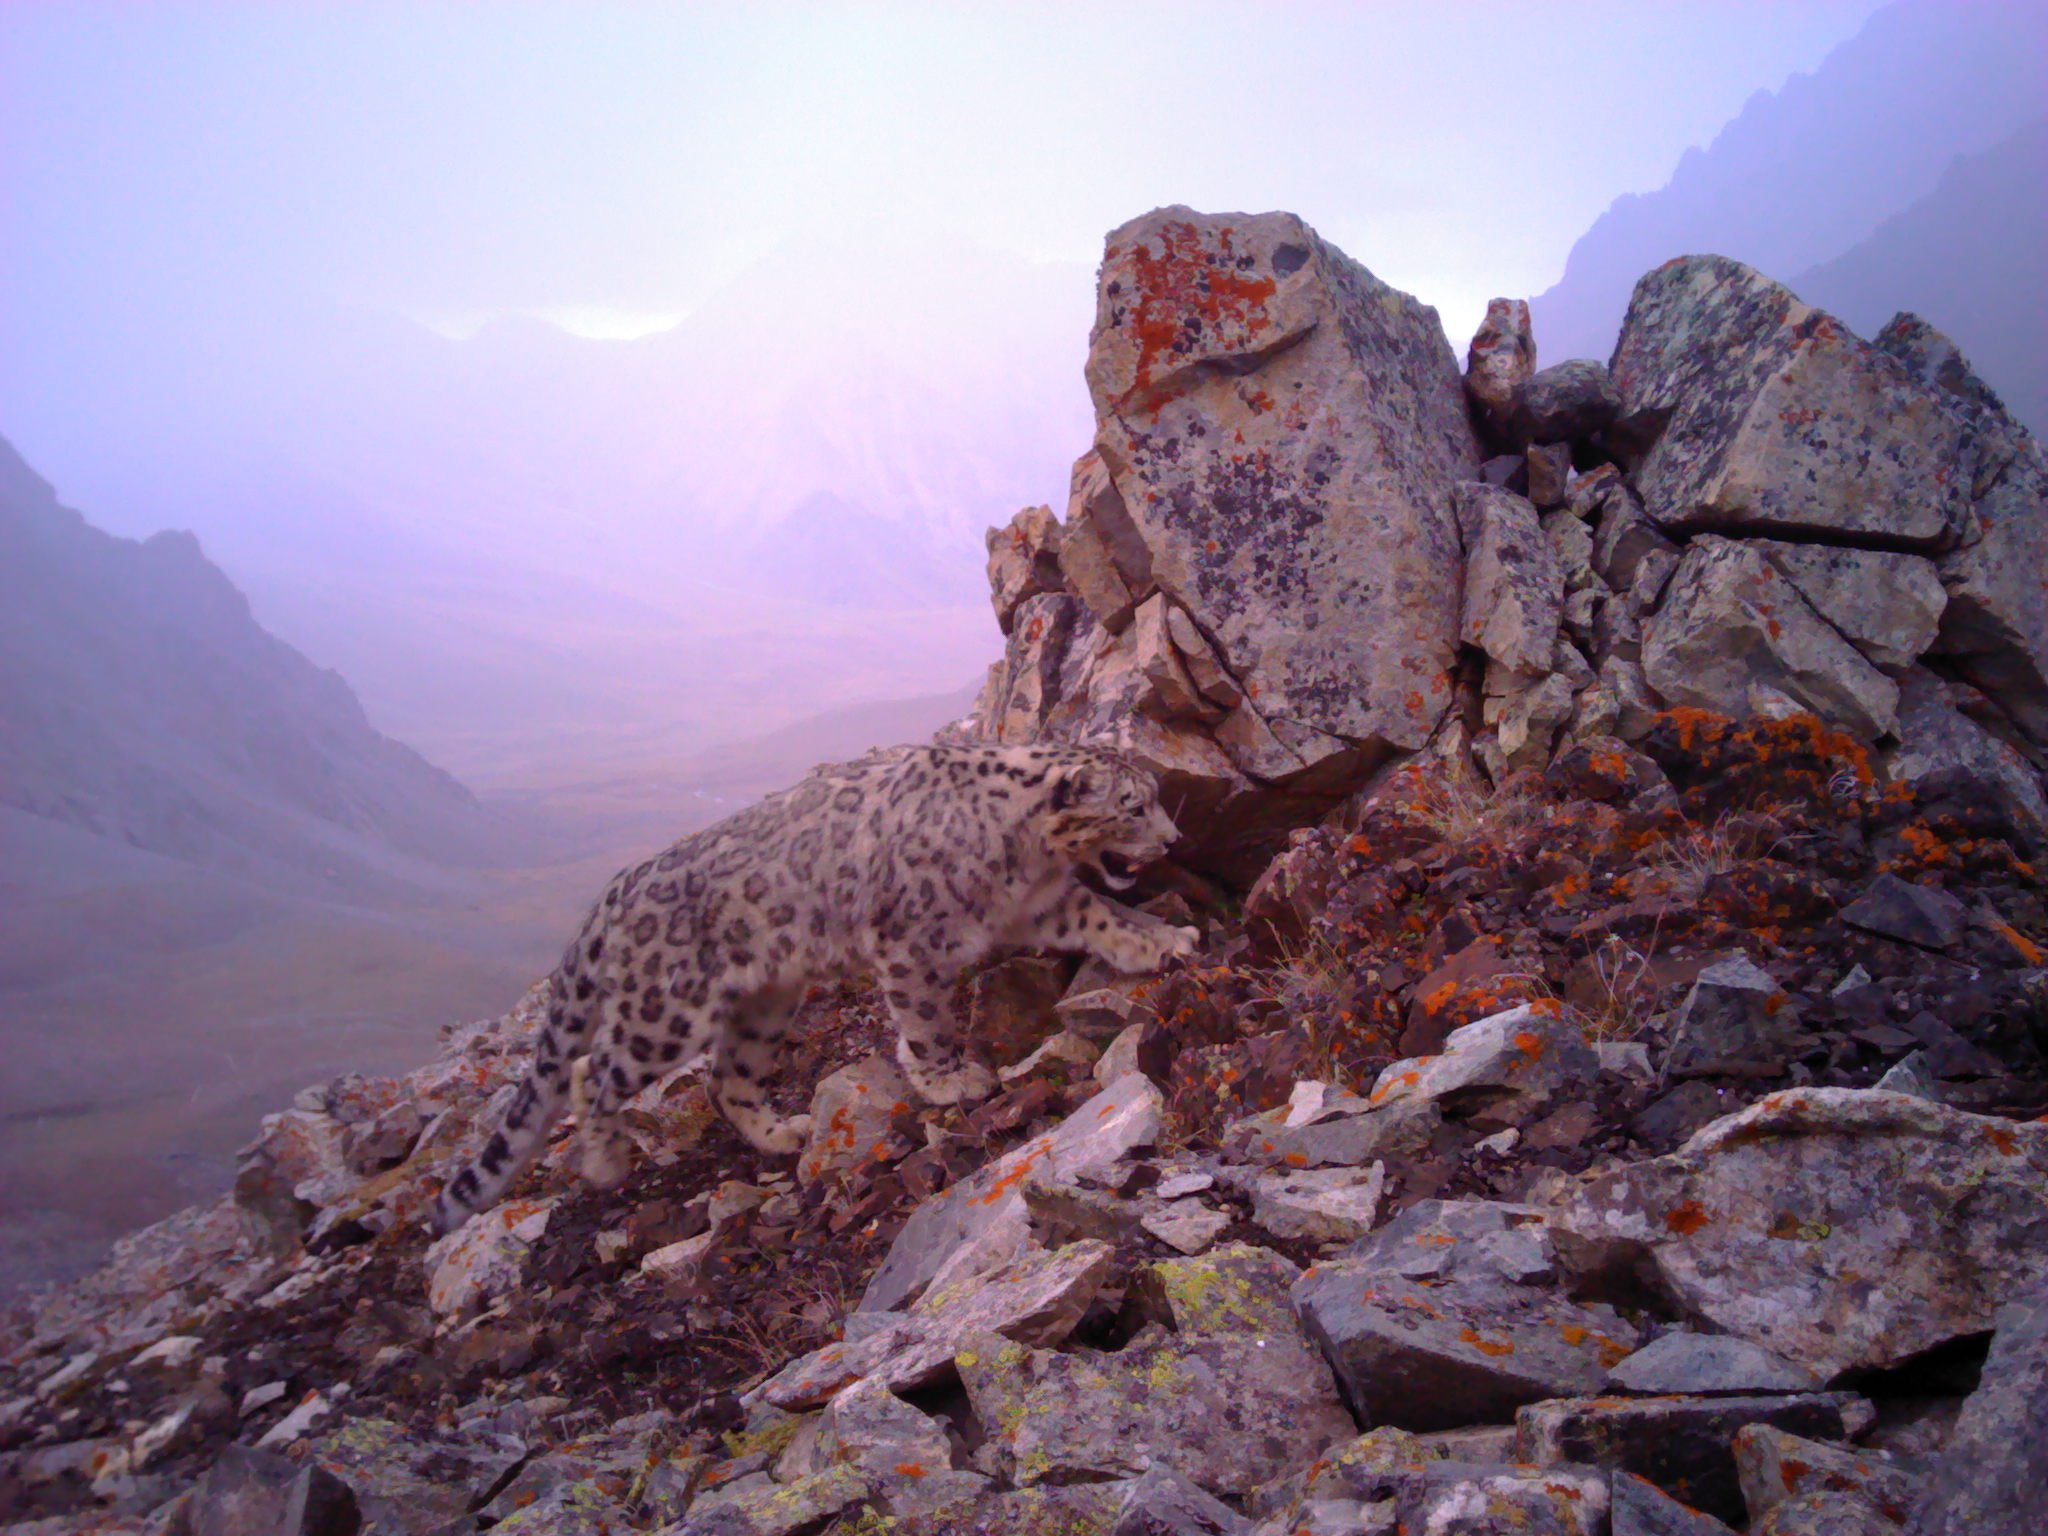 Snow leopard in Kyrgyzstan - Photo by Ilbirs Foundation/UNEP VT